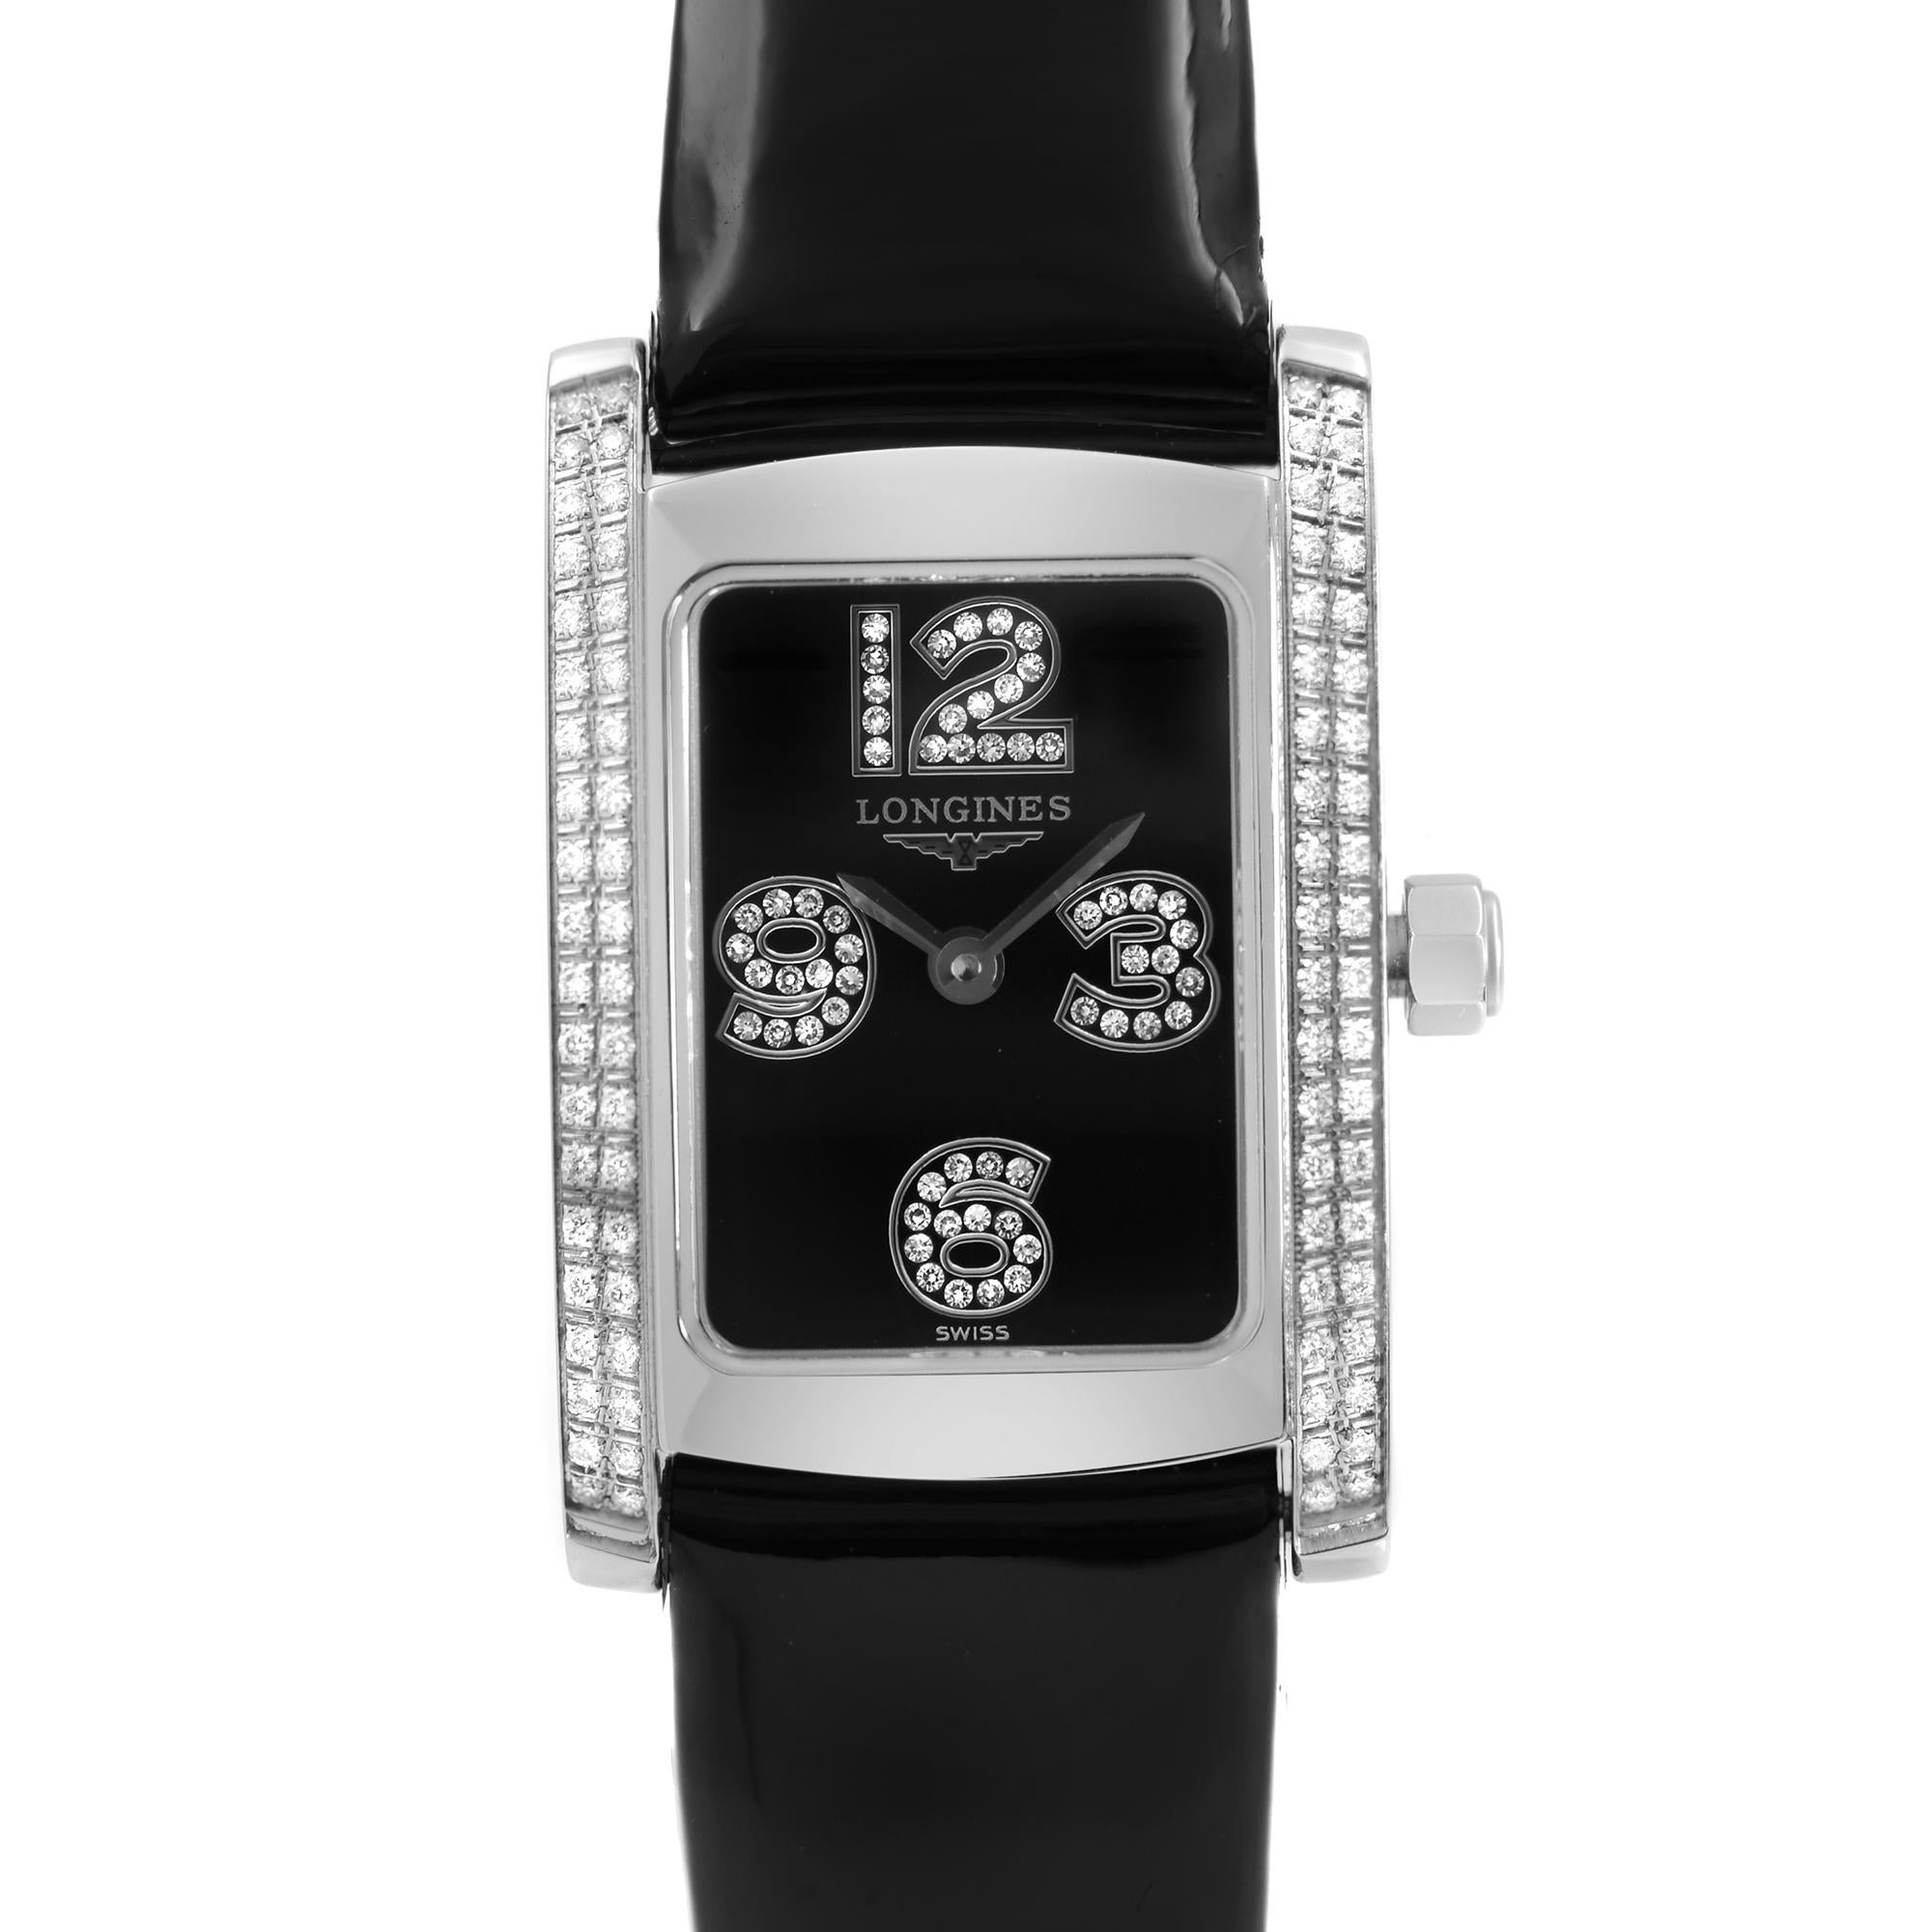 Display Model Longines Dolce Vita Steal Diamonds Black Dial Quartz Ladies Watch L5.155.0.51.2. The Watch Has Minor Blemishes on the Case Back and Band Due to Store Handling. This Beautiful Timepiece is Powered by Quartz (Battery) Movement And